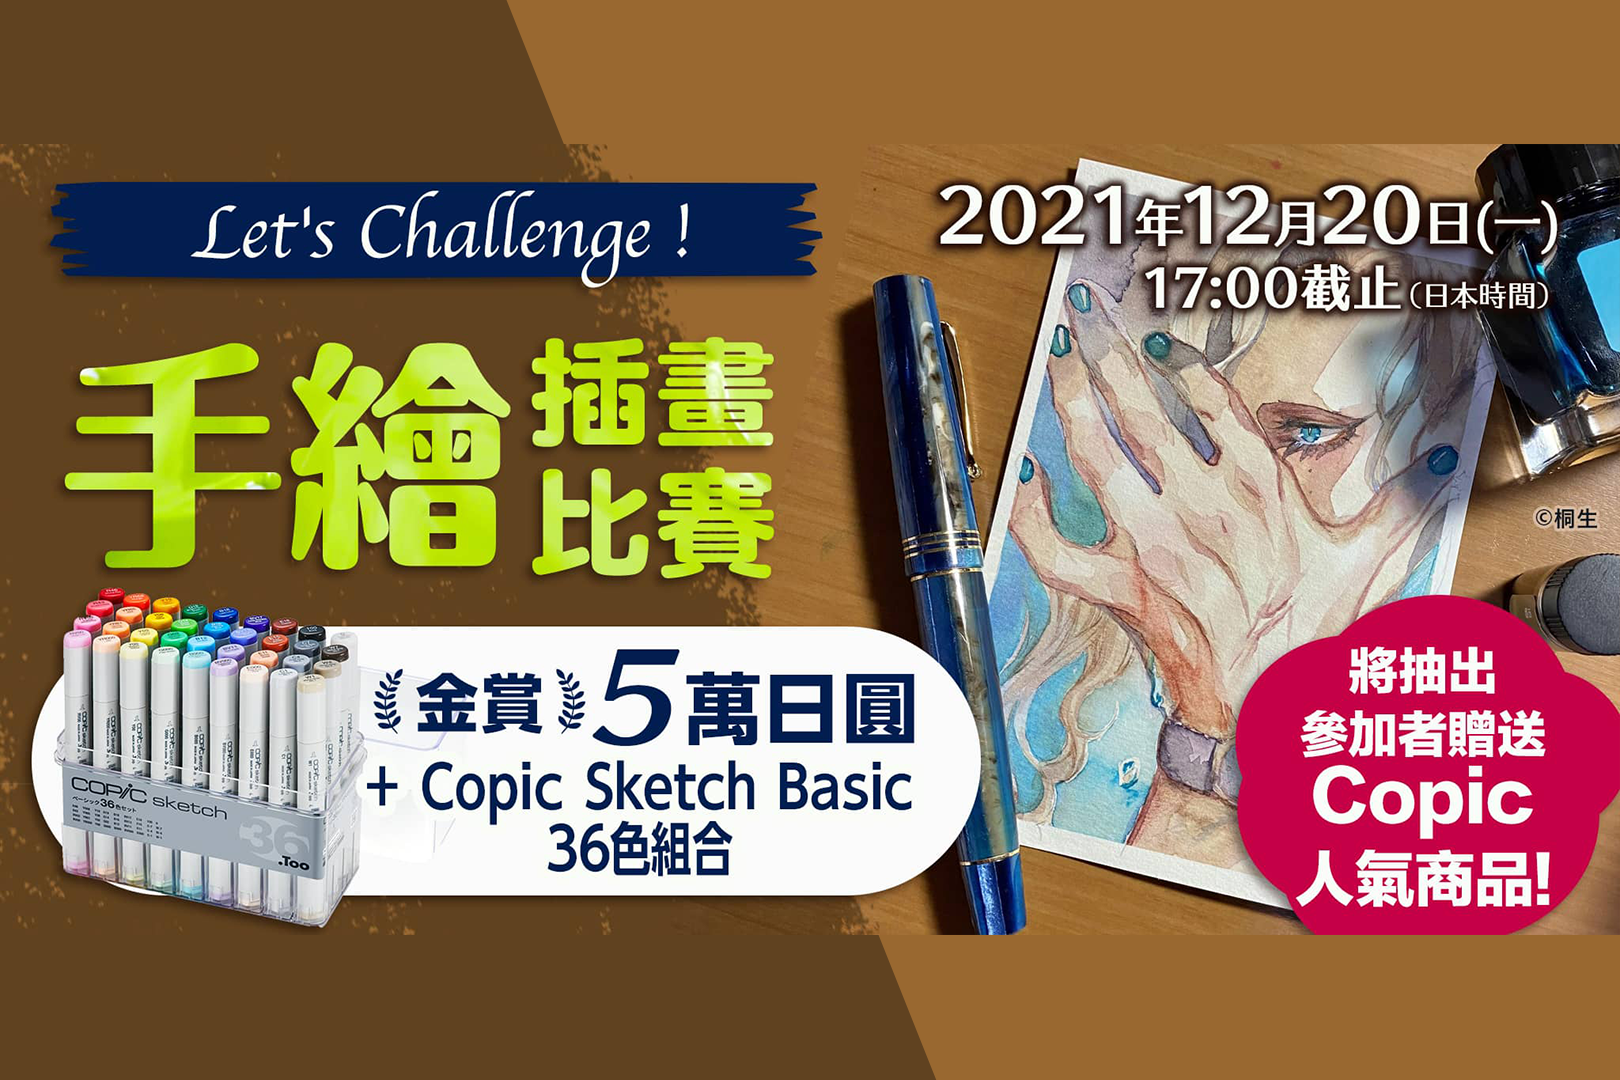 Let’s challenge！手繪插畫比賽 Analog Drawing Contest